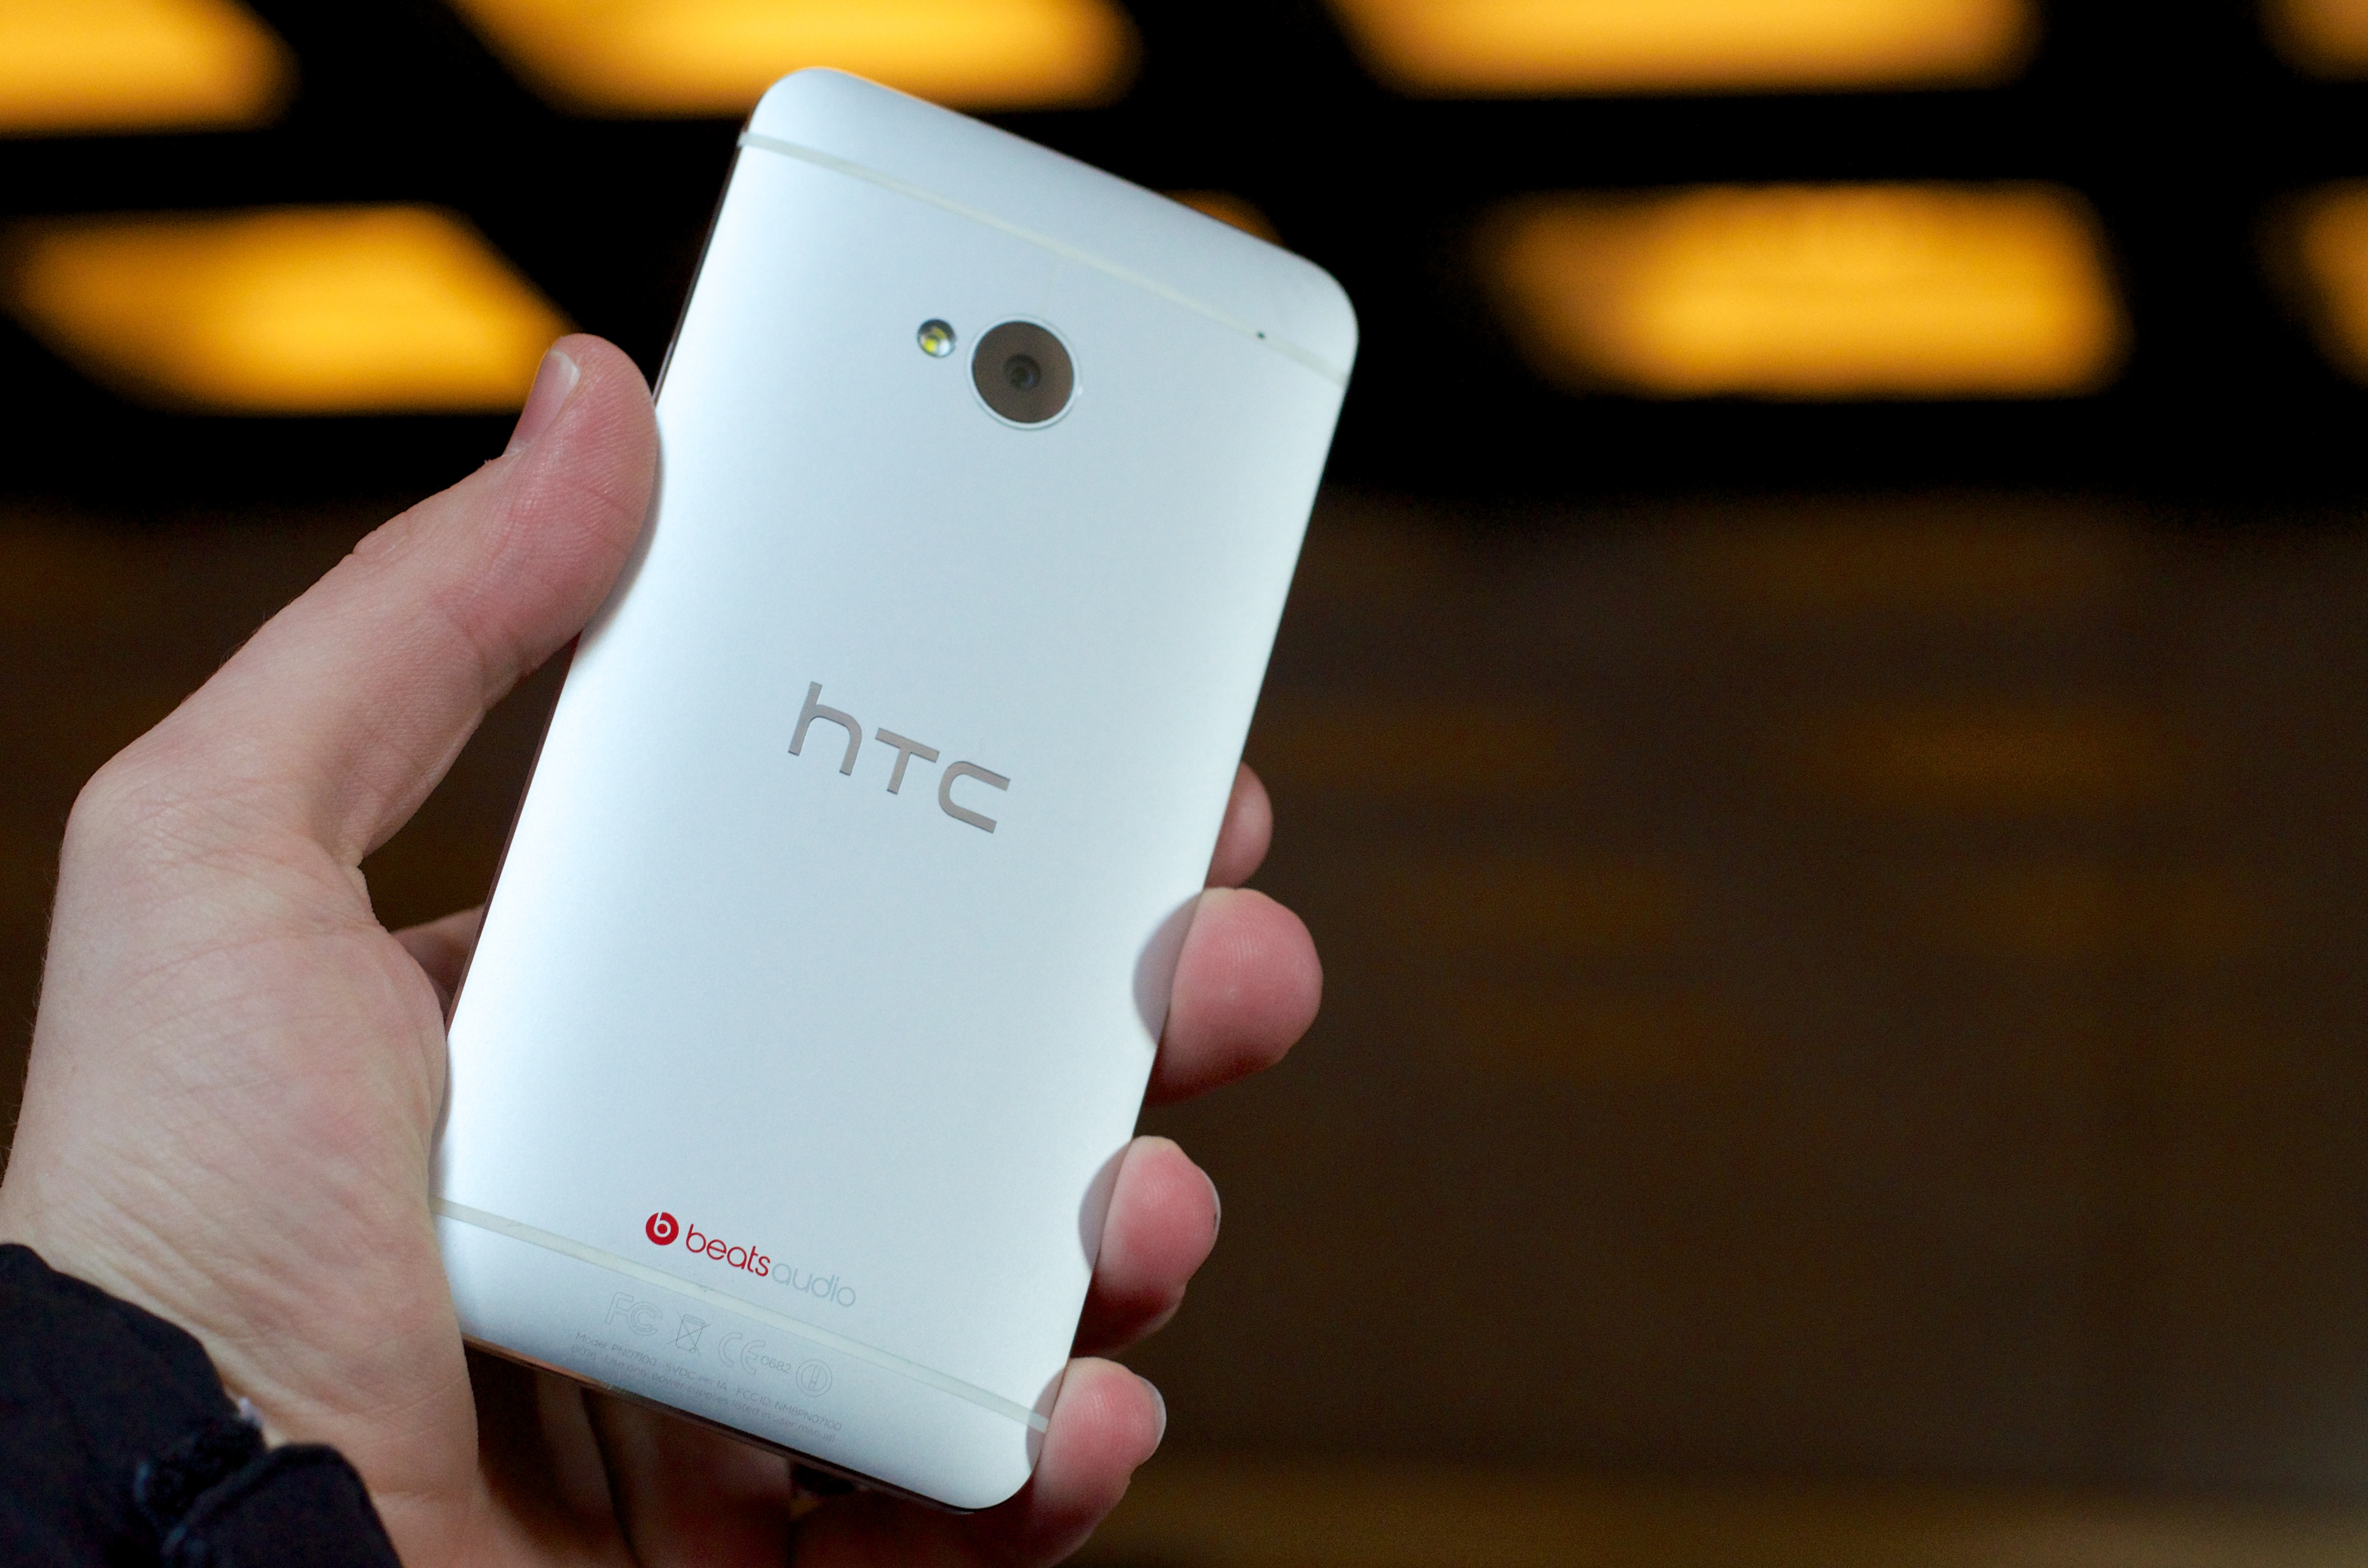 The HTC One release date is on track for early to mid April.